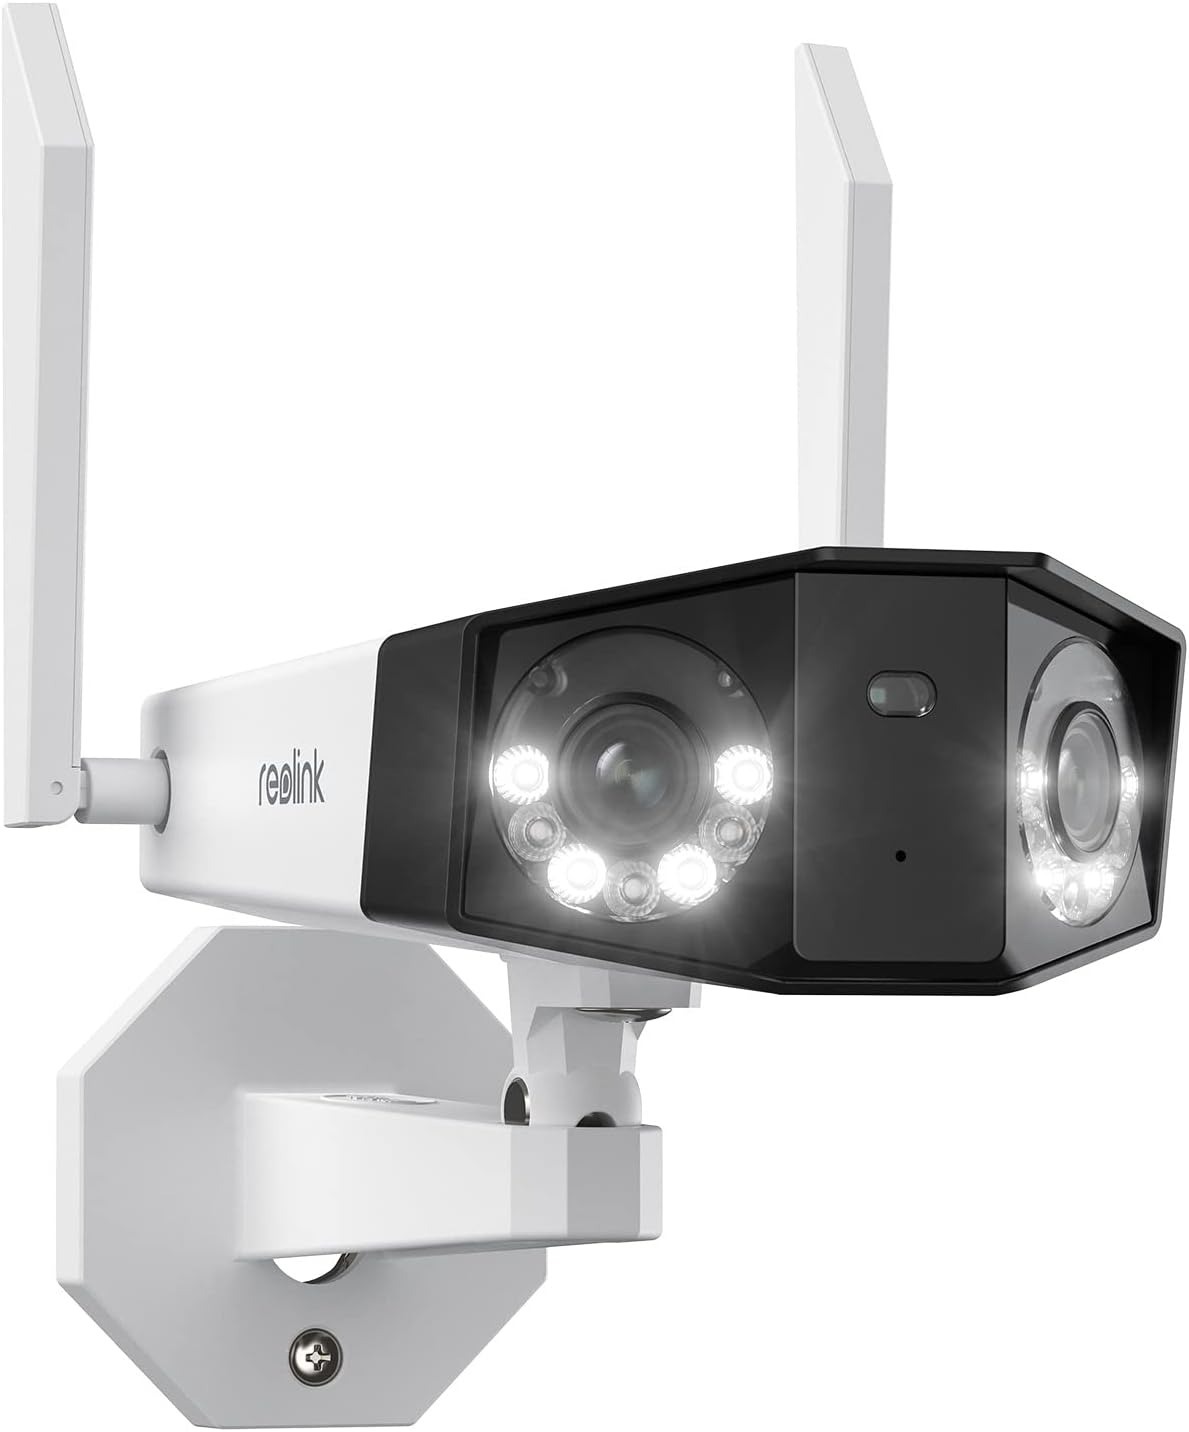 Prime Members: 4K Reolink Duo 2 WiFi Dual Lens Wired Security Camera w/ 180° Panorama, Spotlights, Two-Way Audio $112 + Free Shipping